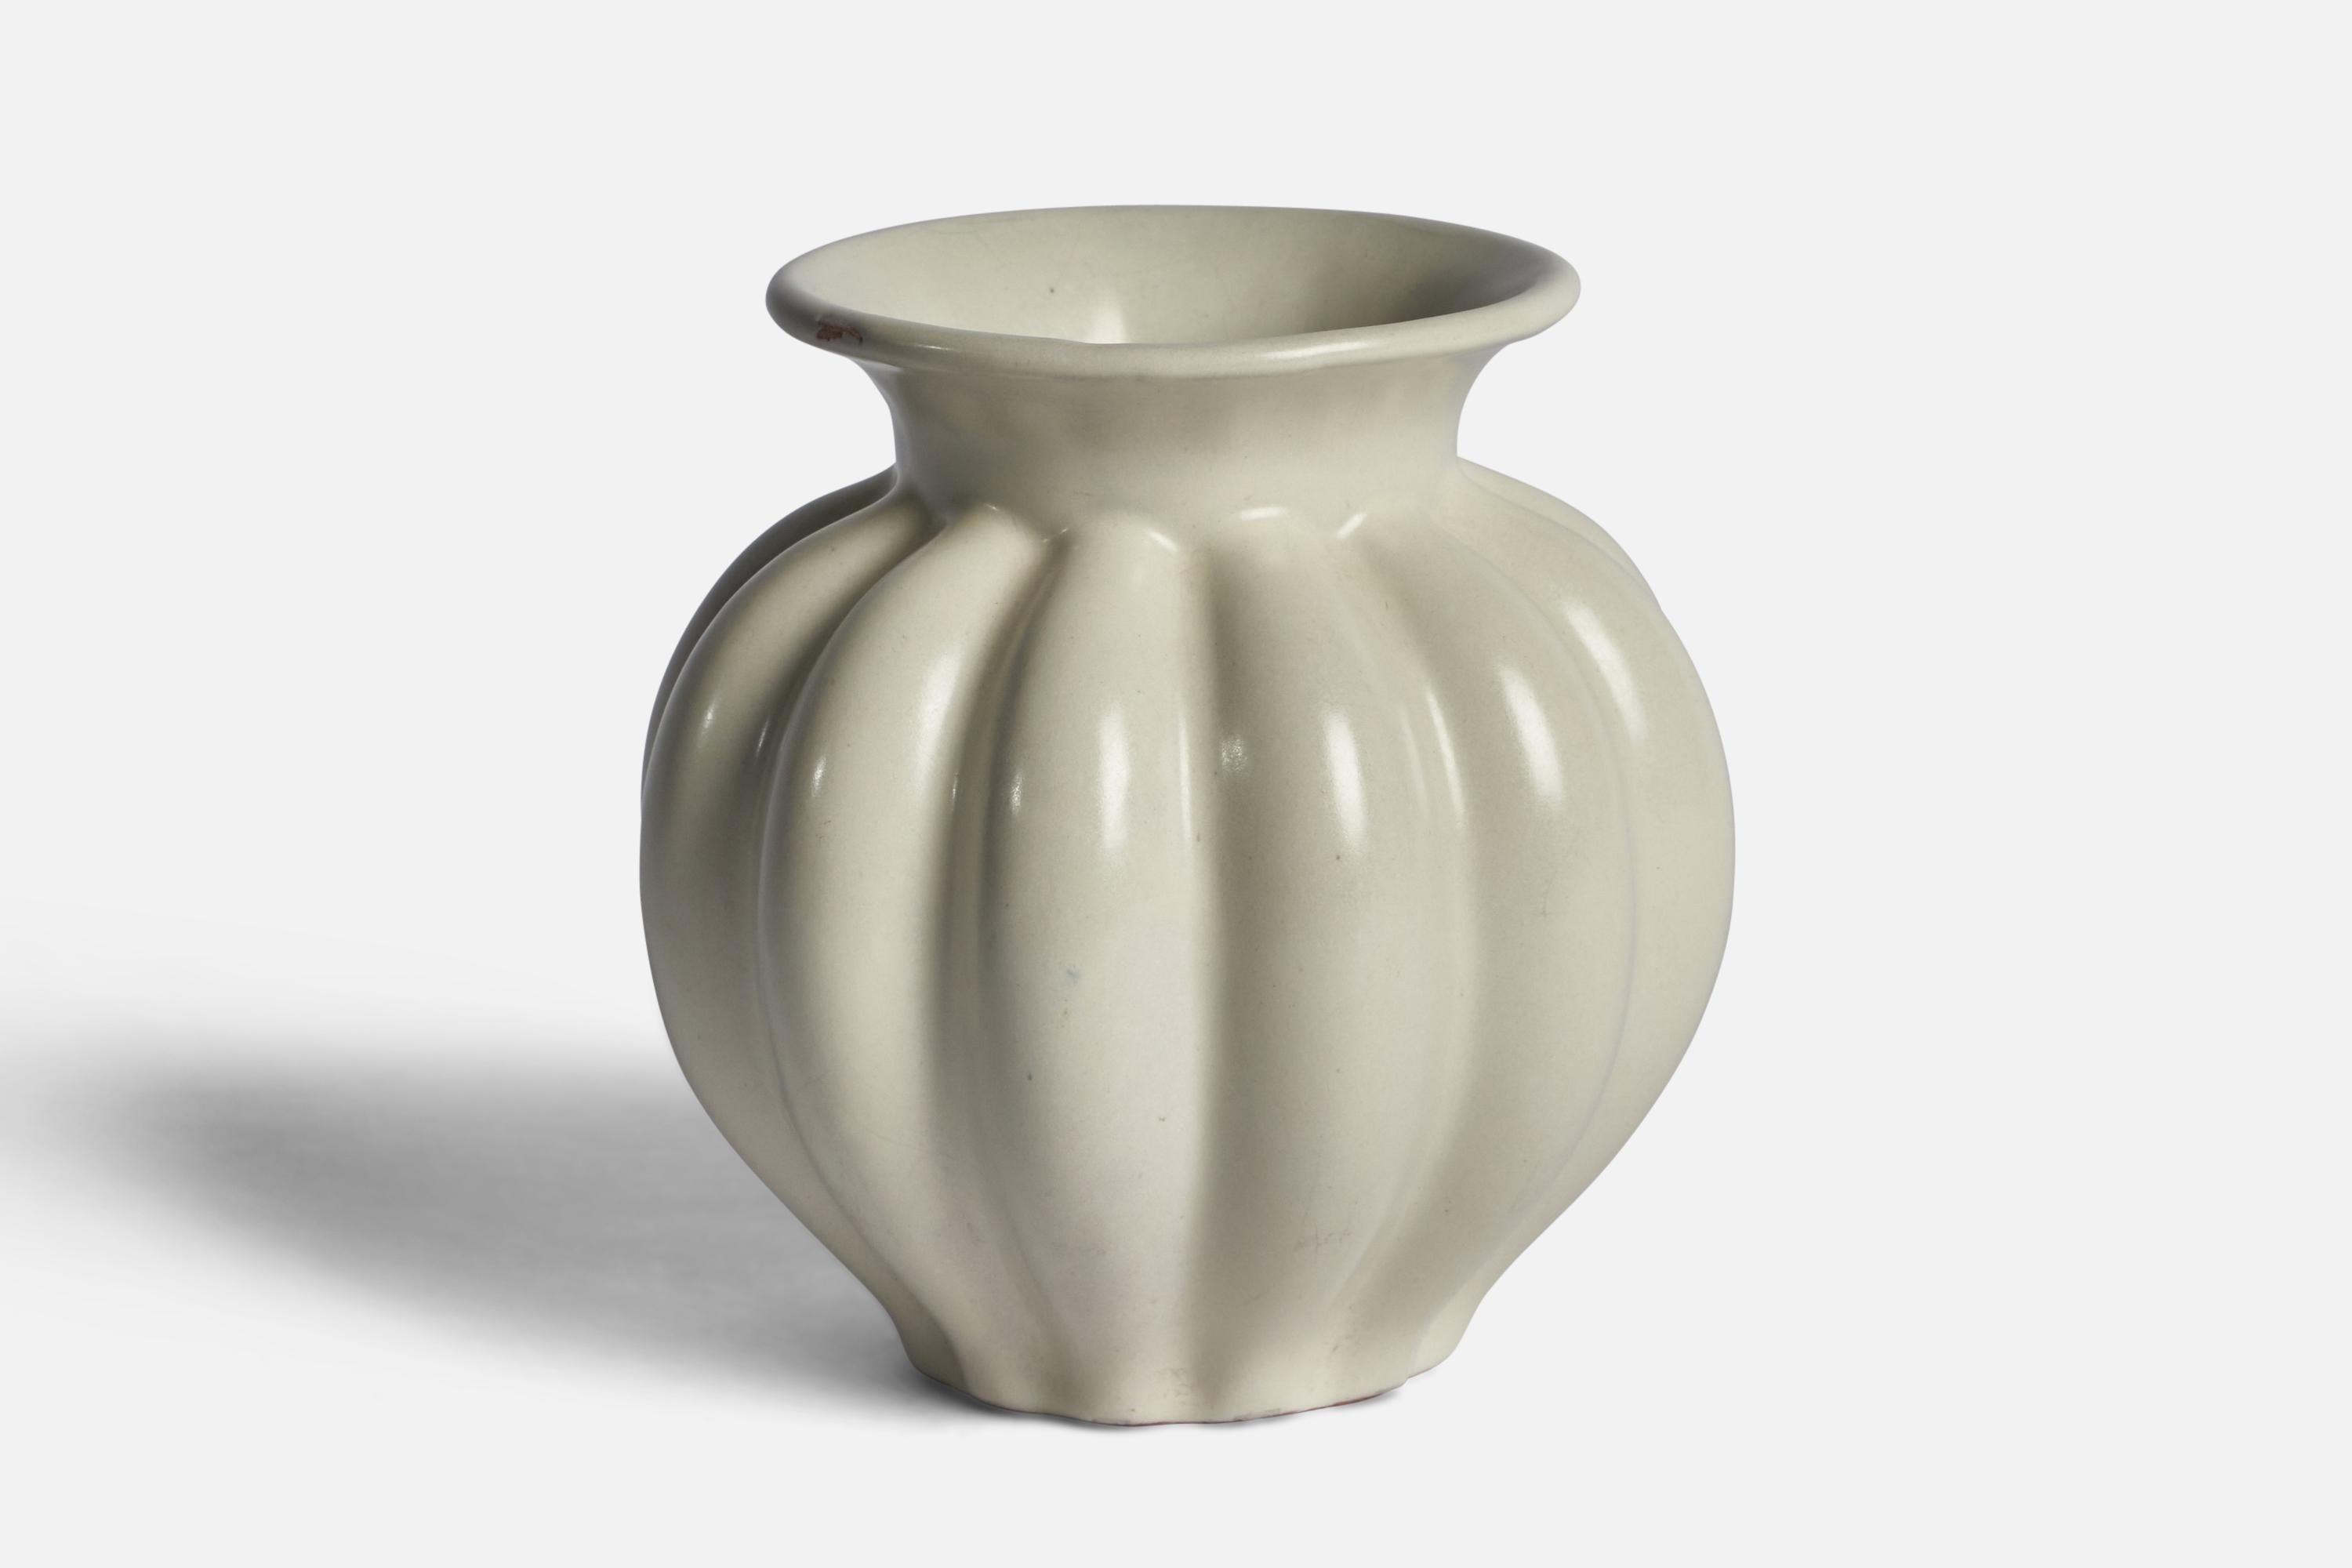 An off-white glazed earthenware vase designed and produced by Upsala Ekeby, Sweden, 1930s.

Production-related absence of glaze to upper rim.